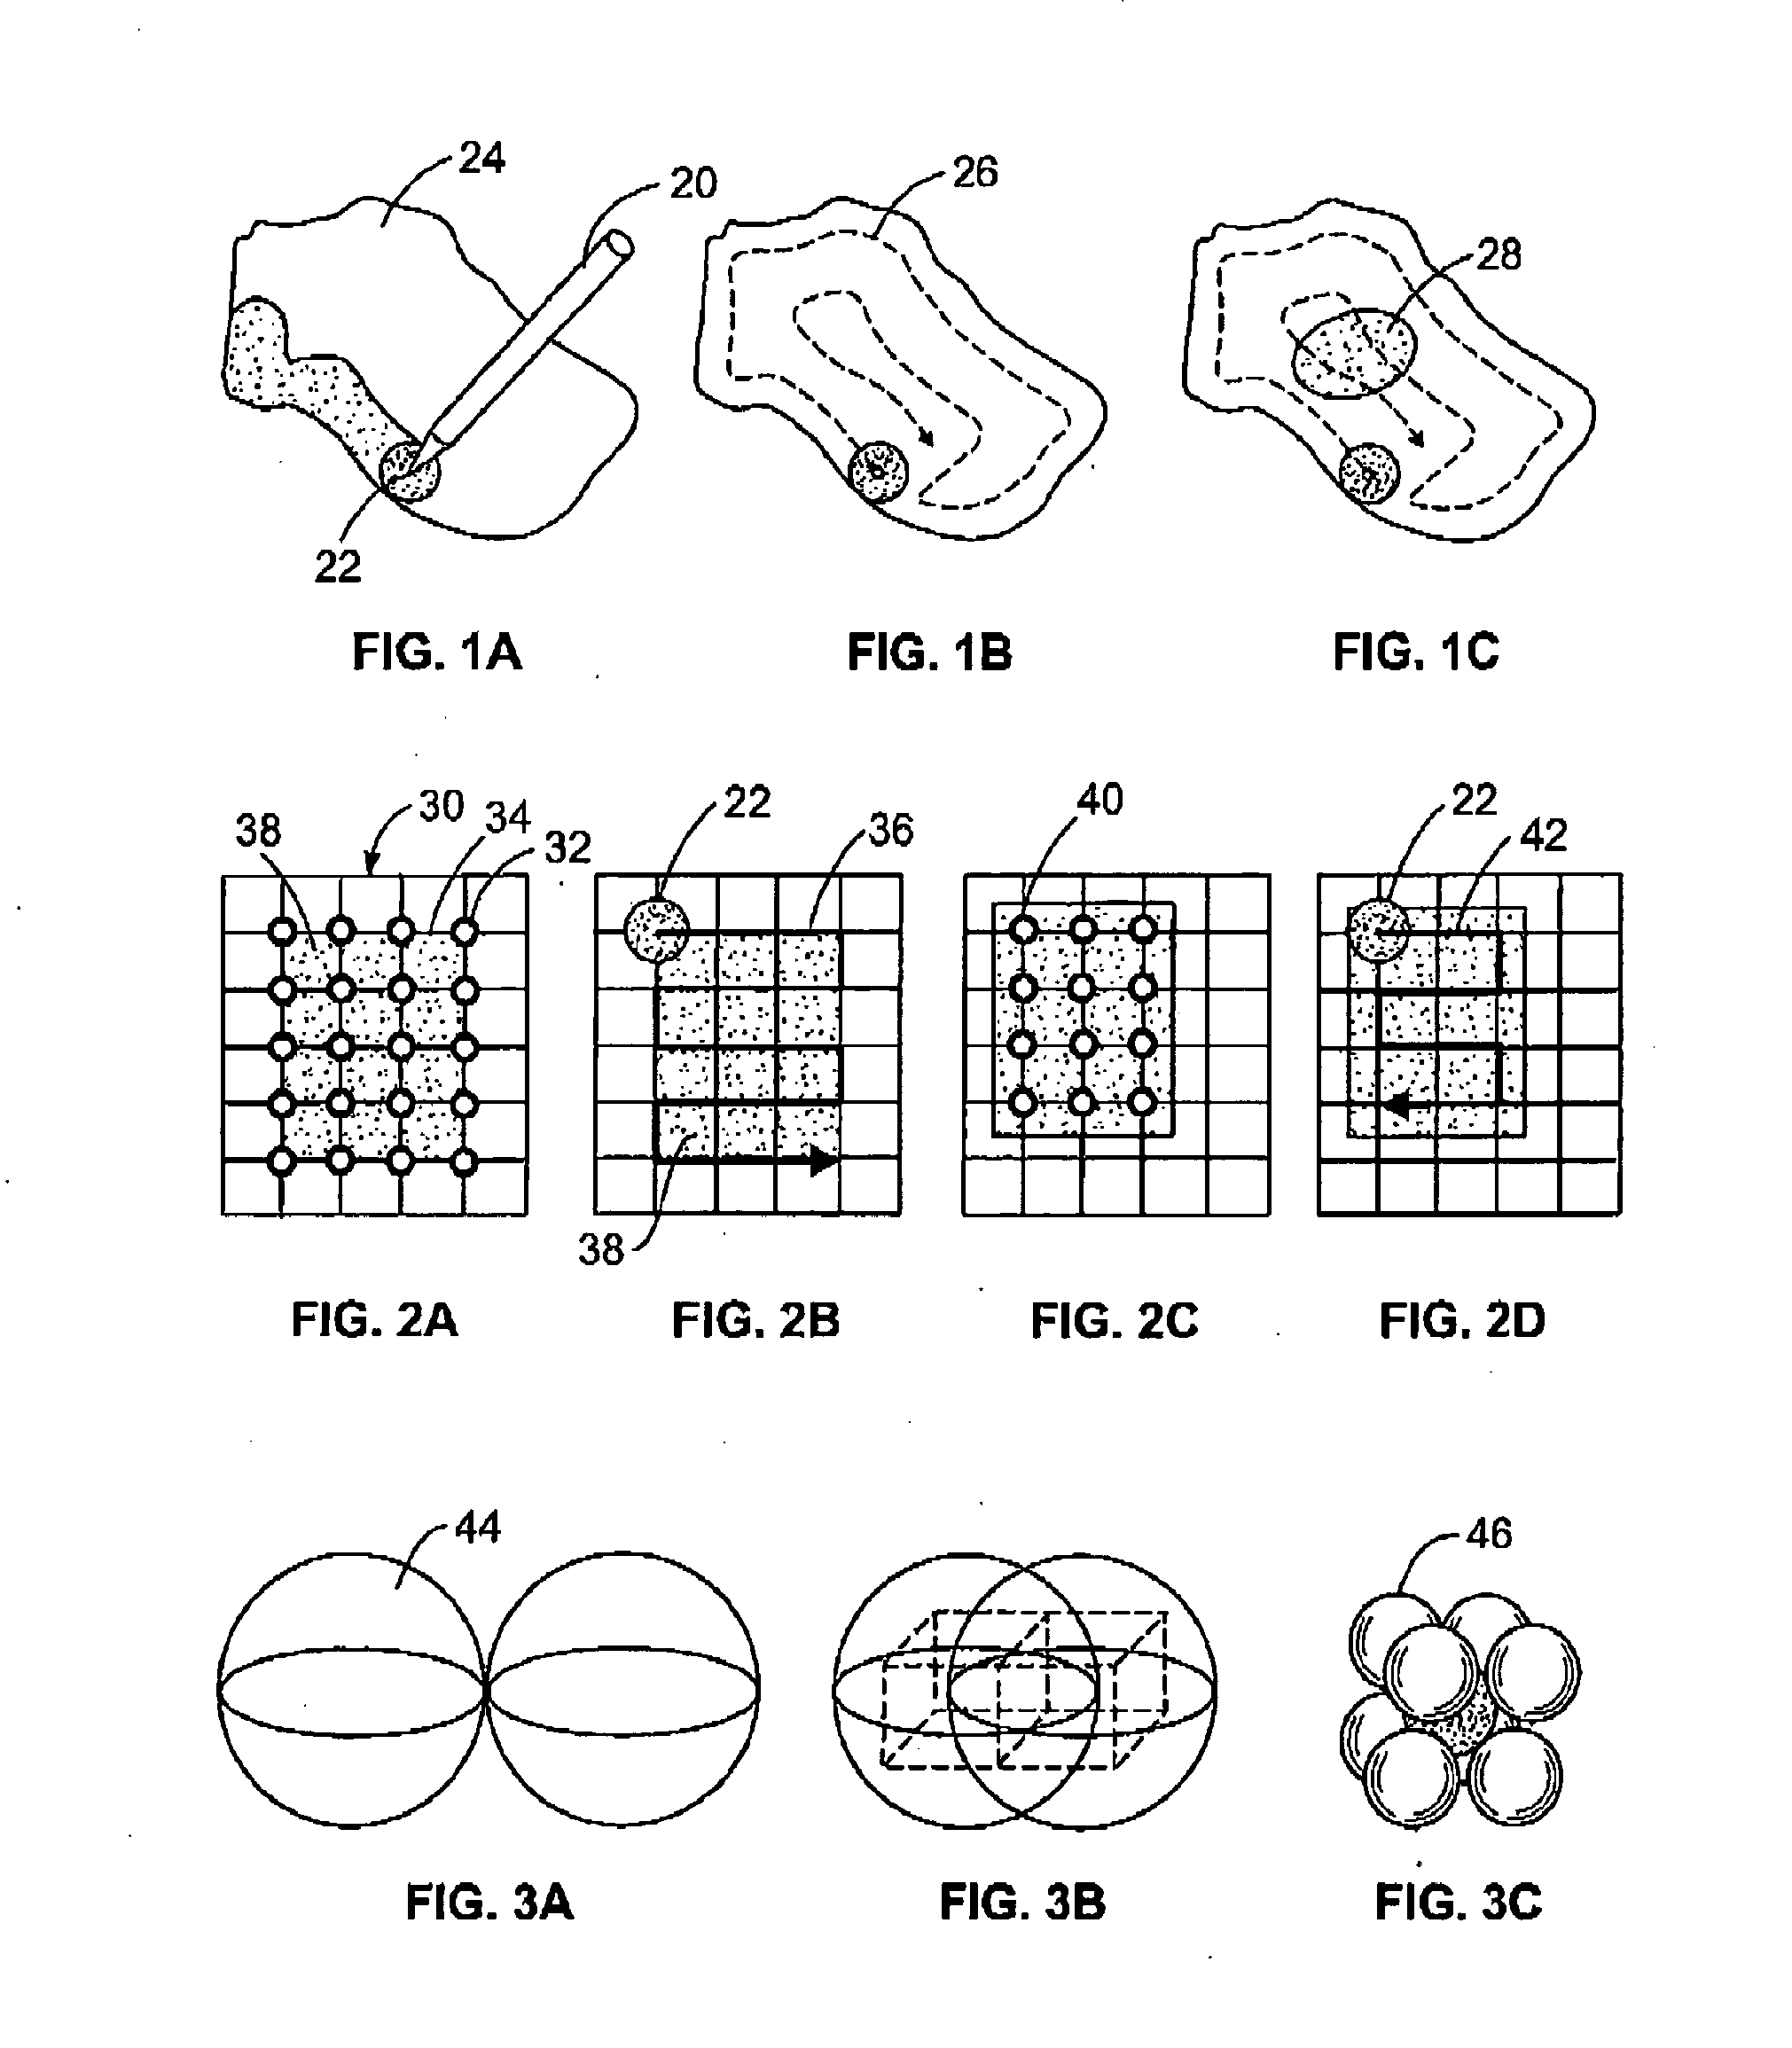 System and methods for using a dynamic gamma knife for radiosurgery